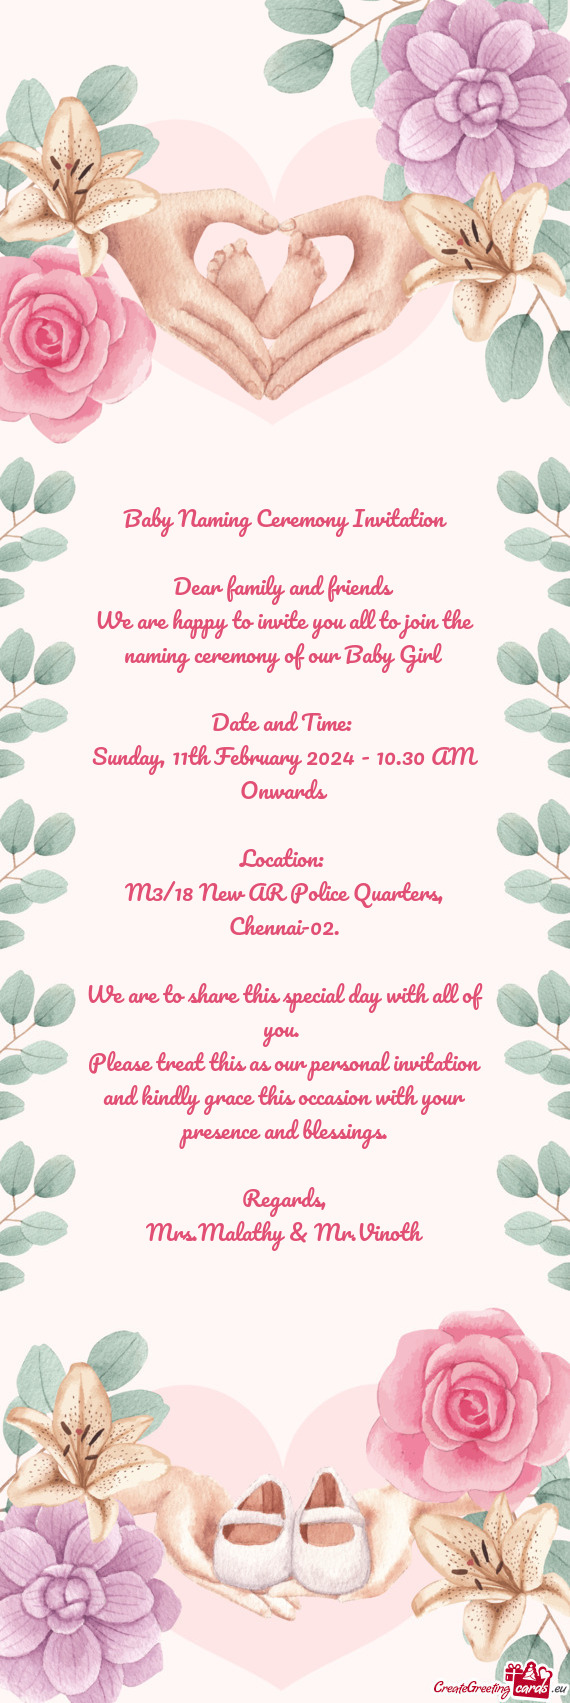 Baby Naming Ceremony Invitation Dear family and friends We are happy to invite you all to join